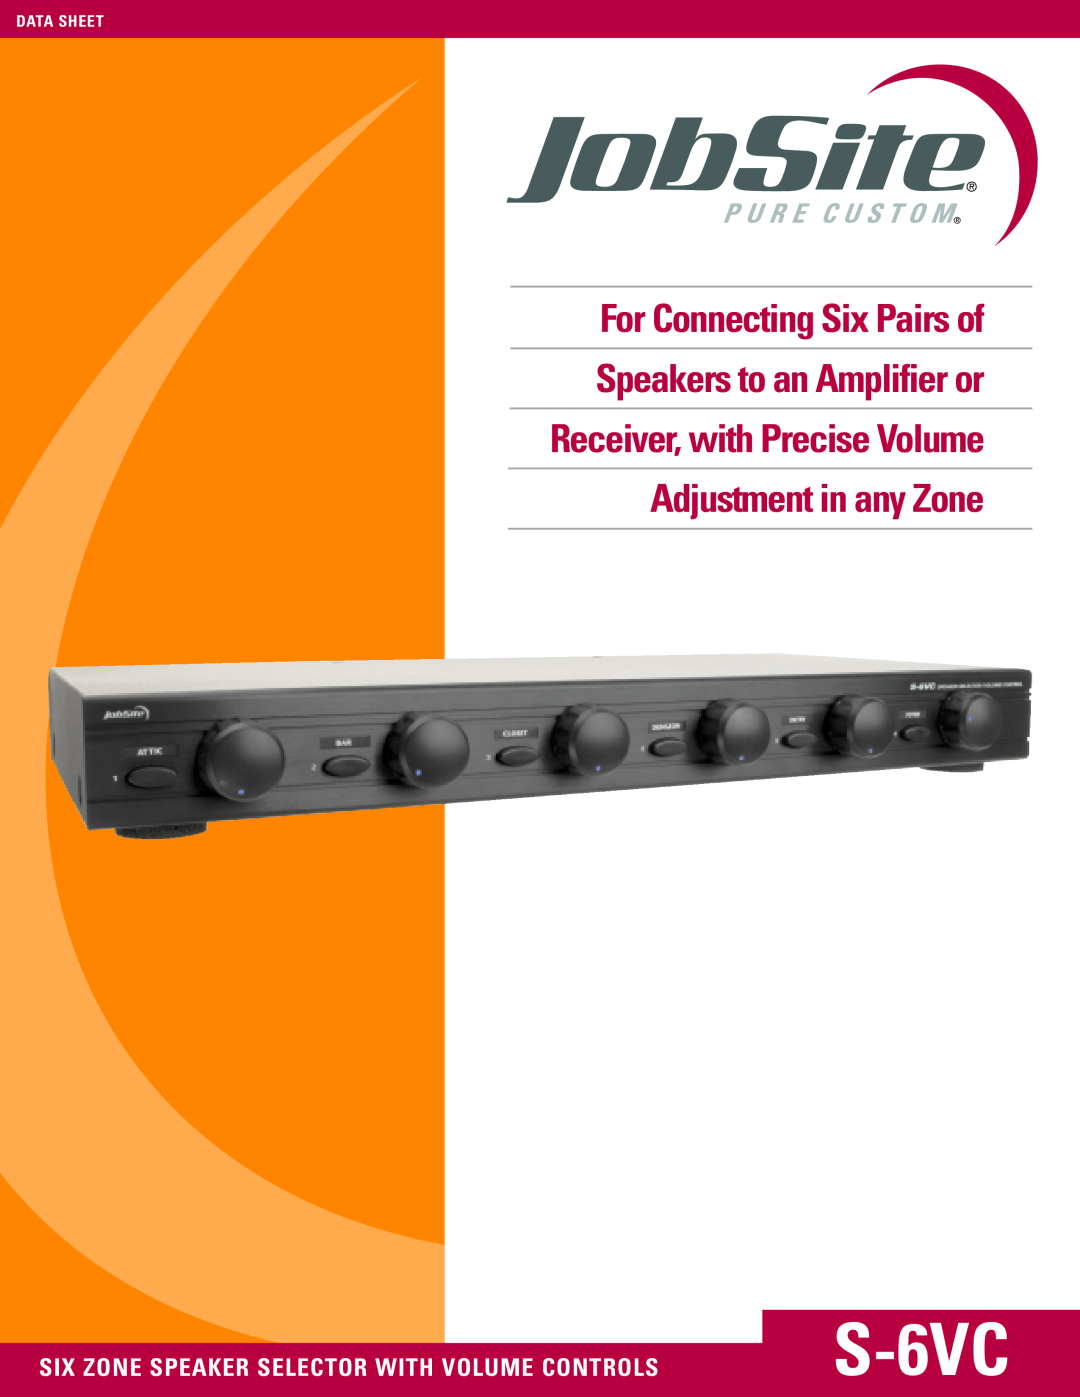 JobSite Systems S-6VC manual Six Zone Speaker Selector With Volume Controls, Adjustment in any Zone, Data Sheet 